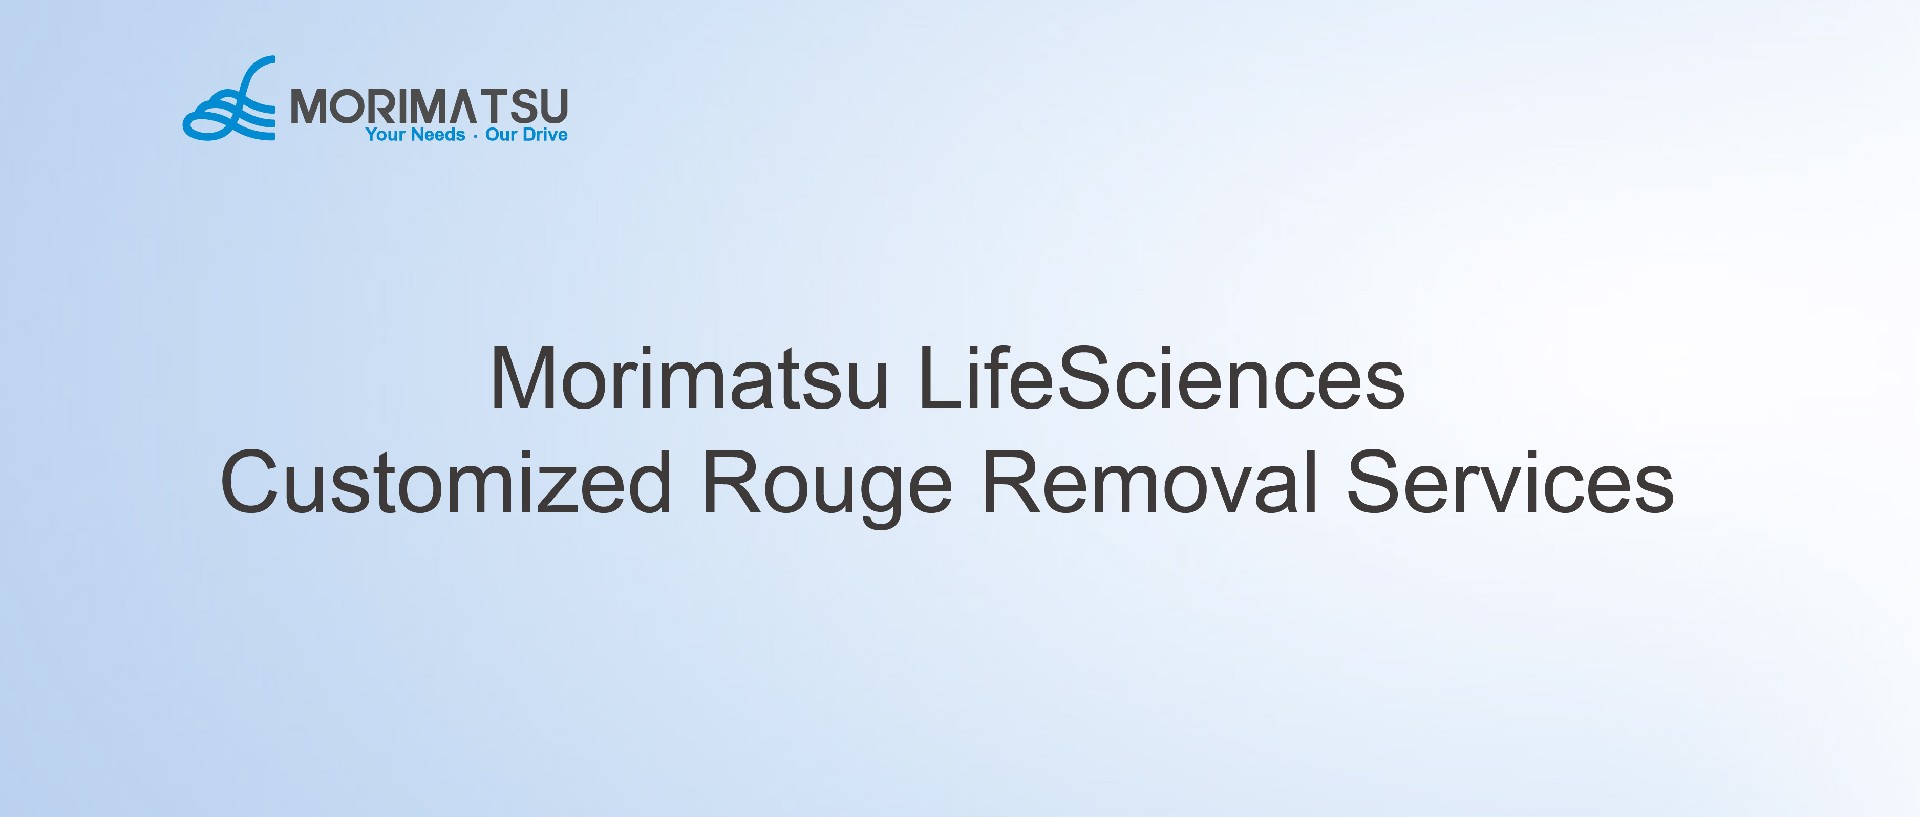 Morimatsu Service | Various Customized Rouge Removal Services to Eliminate Customers’ Worries